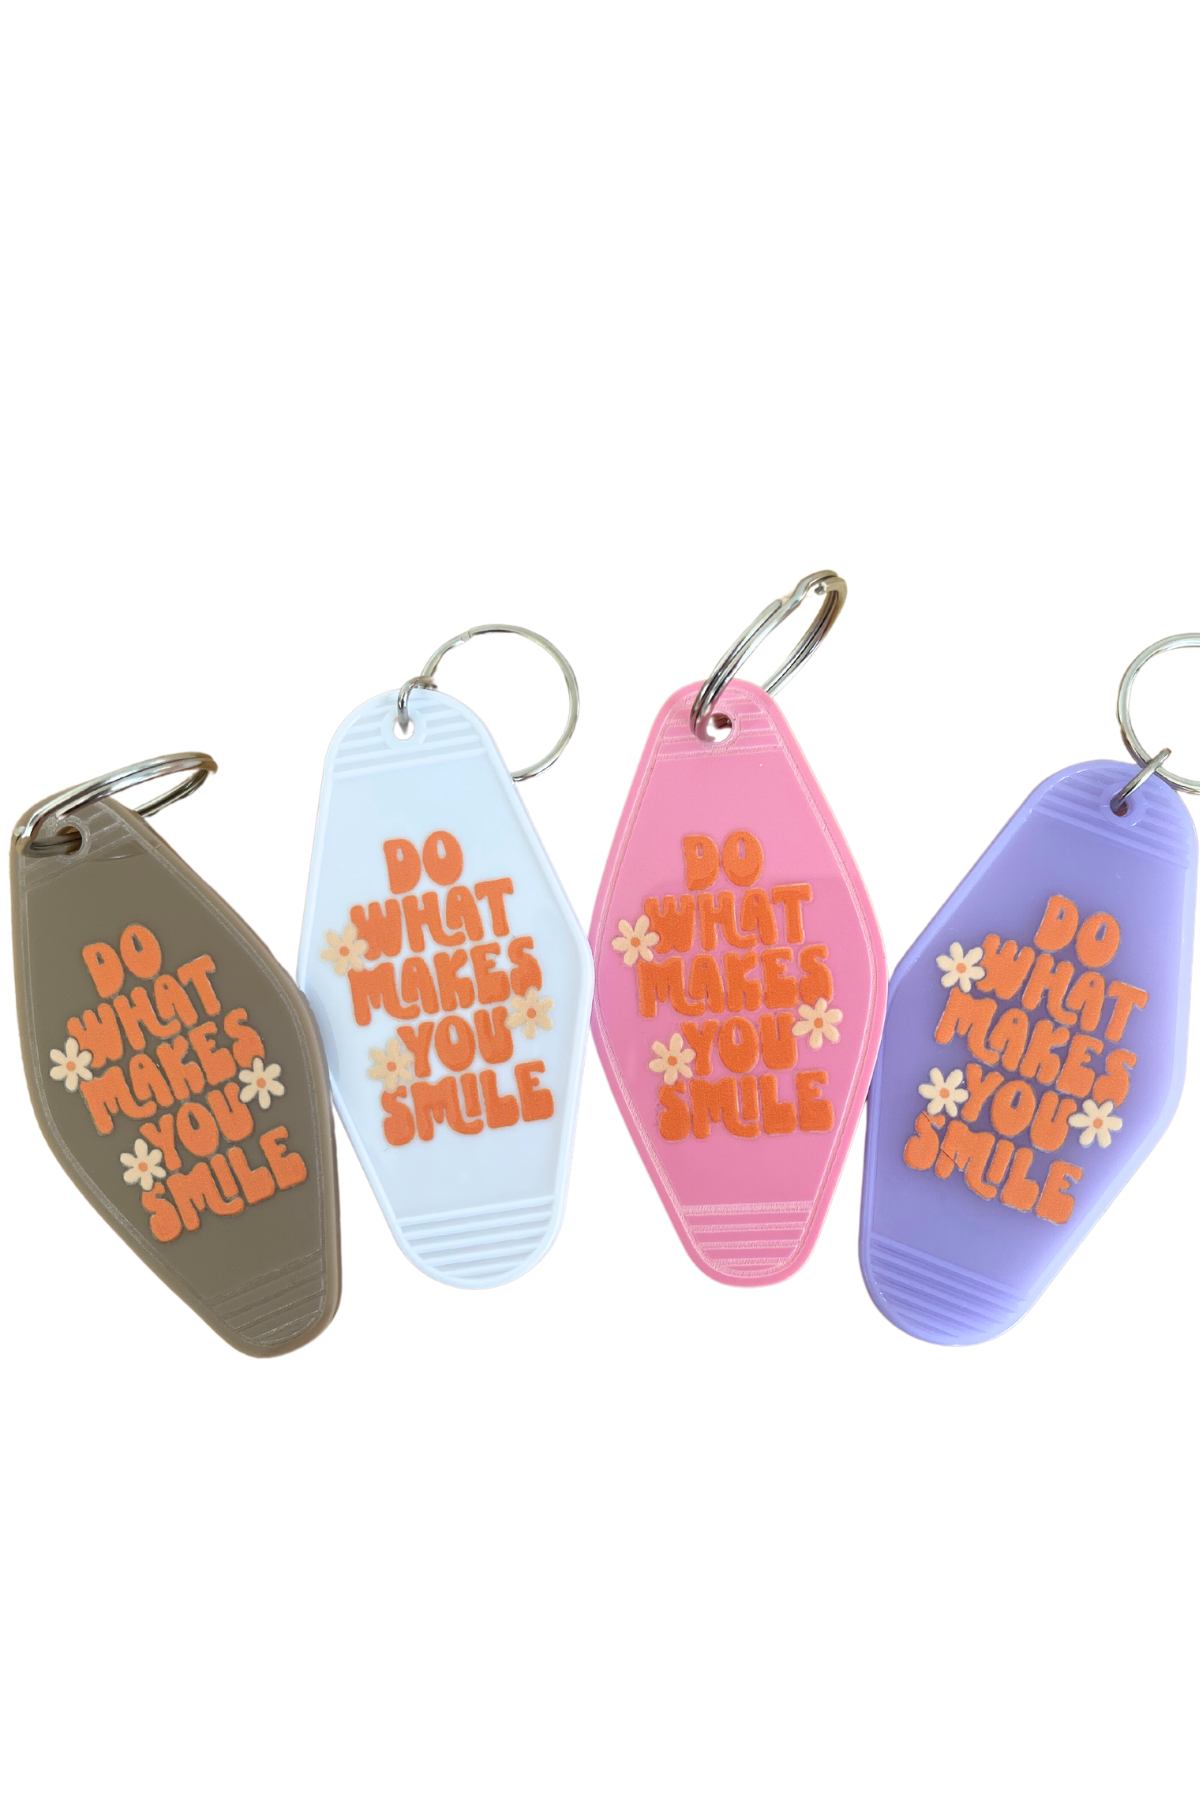 Do What Makes You Smile Motel Keychain